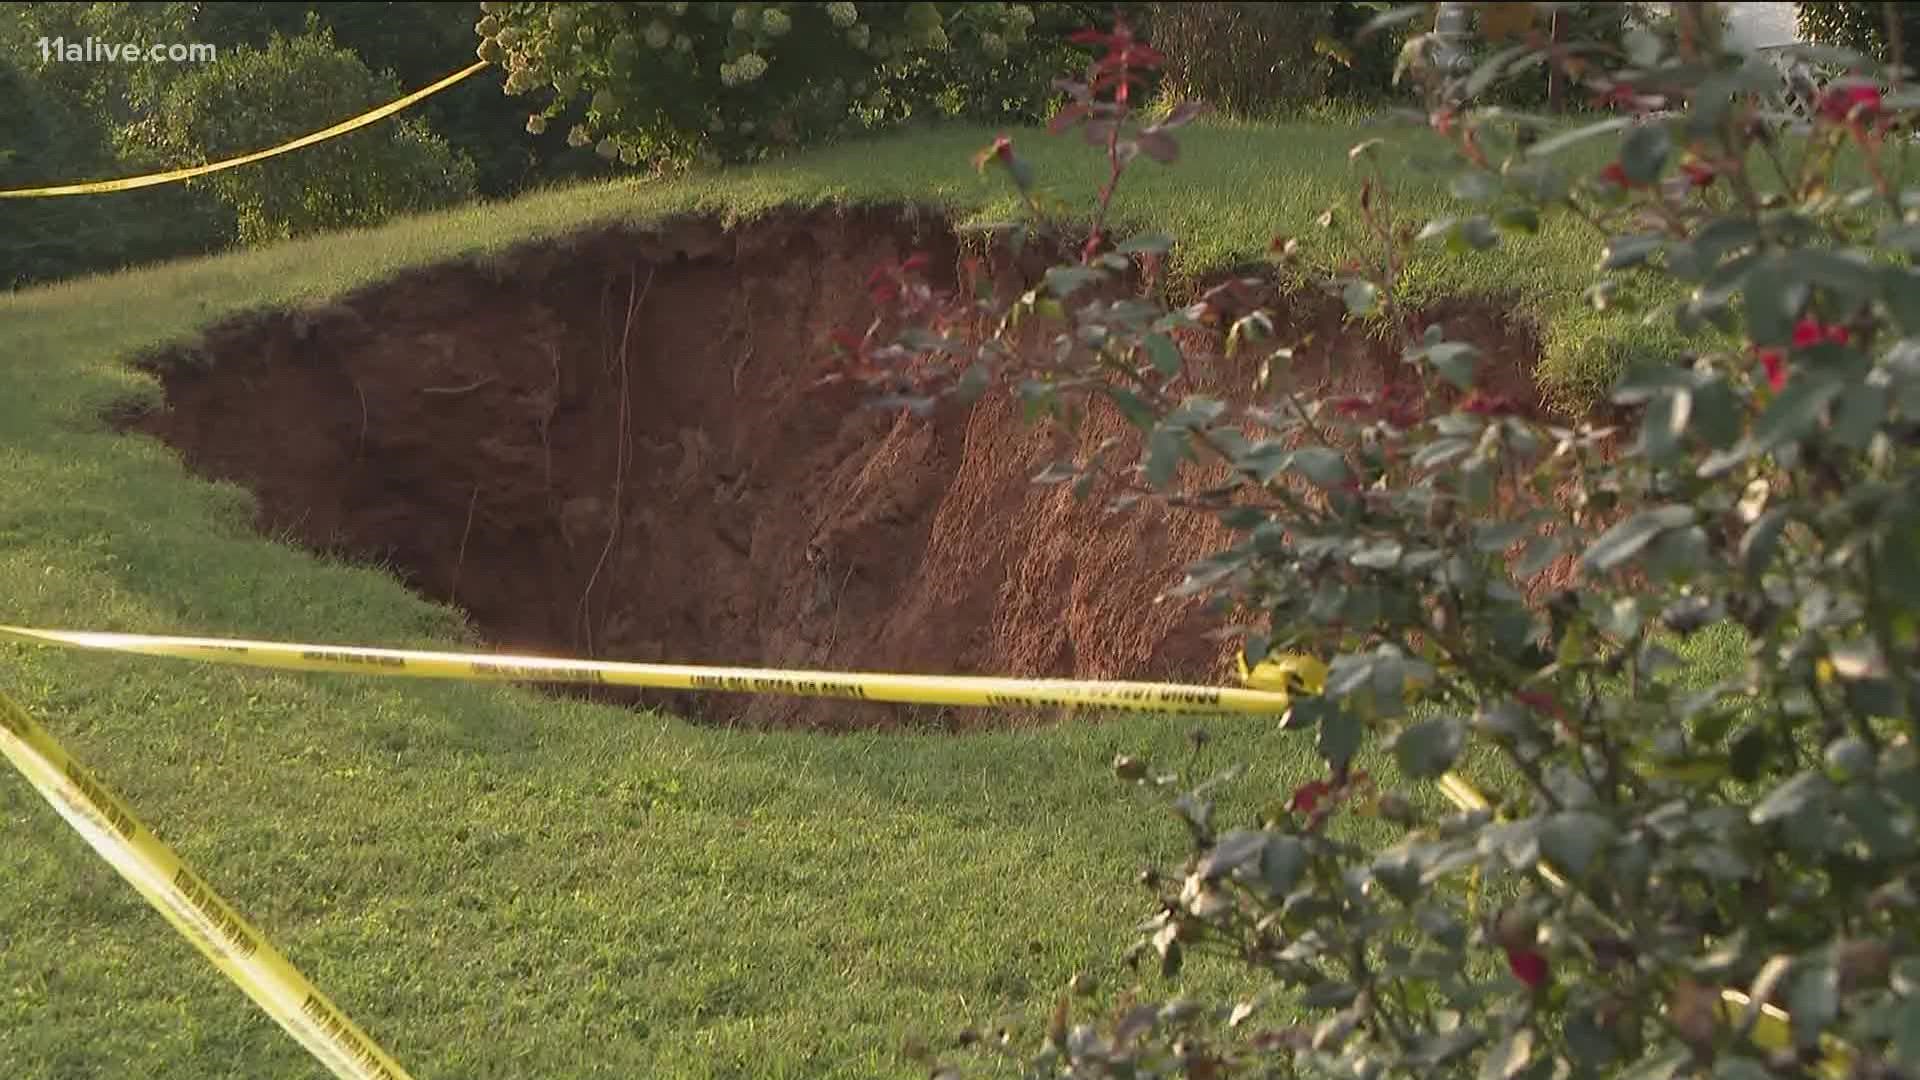 The massive sinkhole is threatening to take over the yard of a Marietta home.